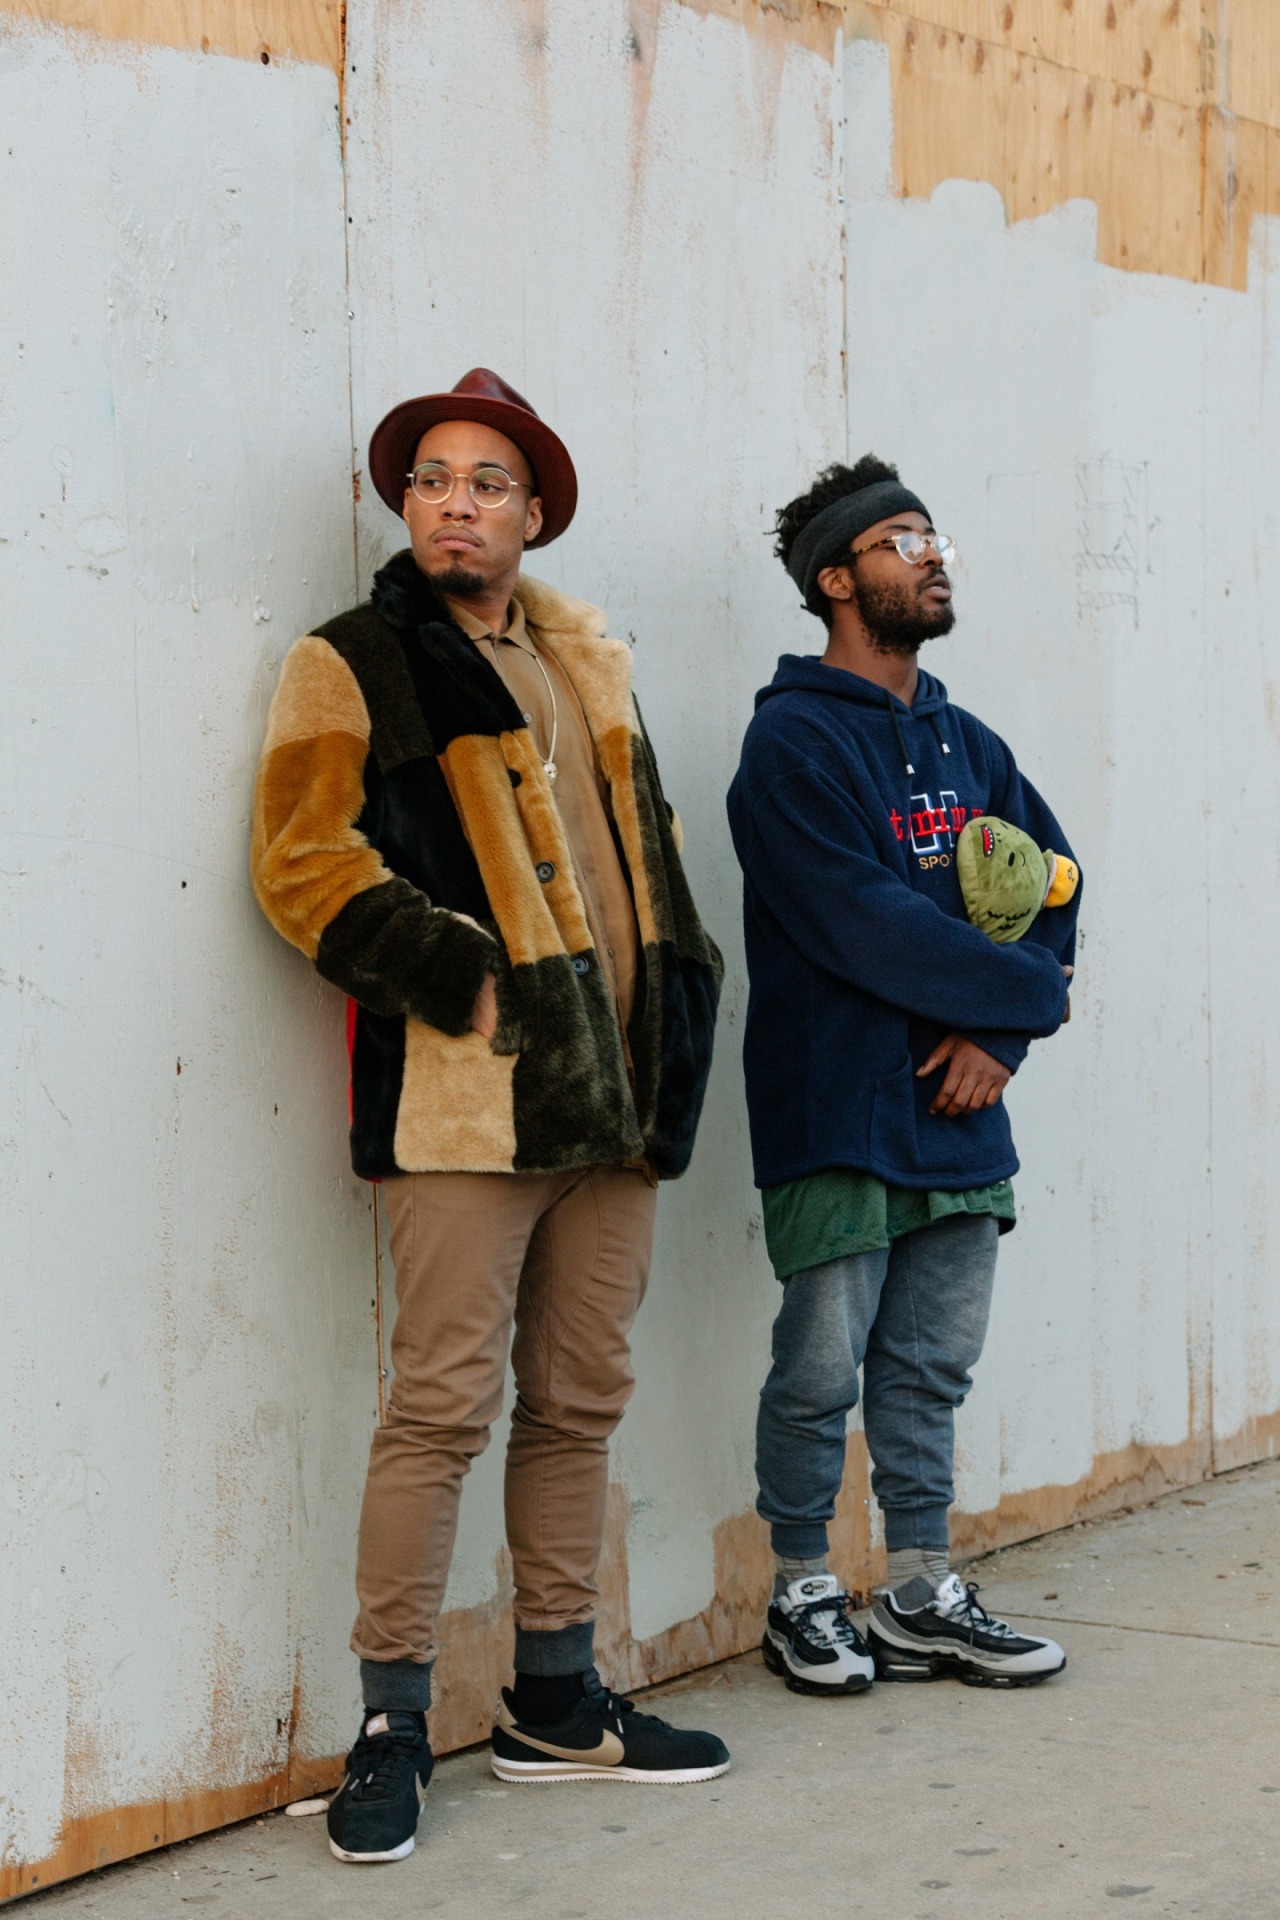 soulknowledge:
“ Nxworries.
Photographed by Michael Anthony Hernandez.
”